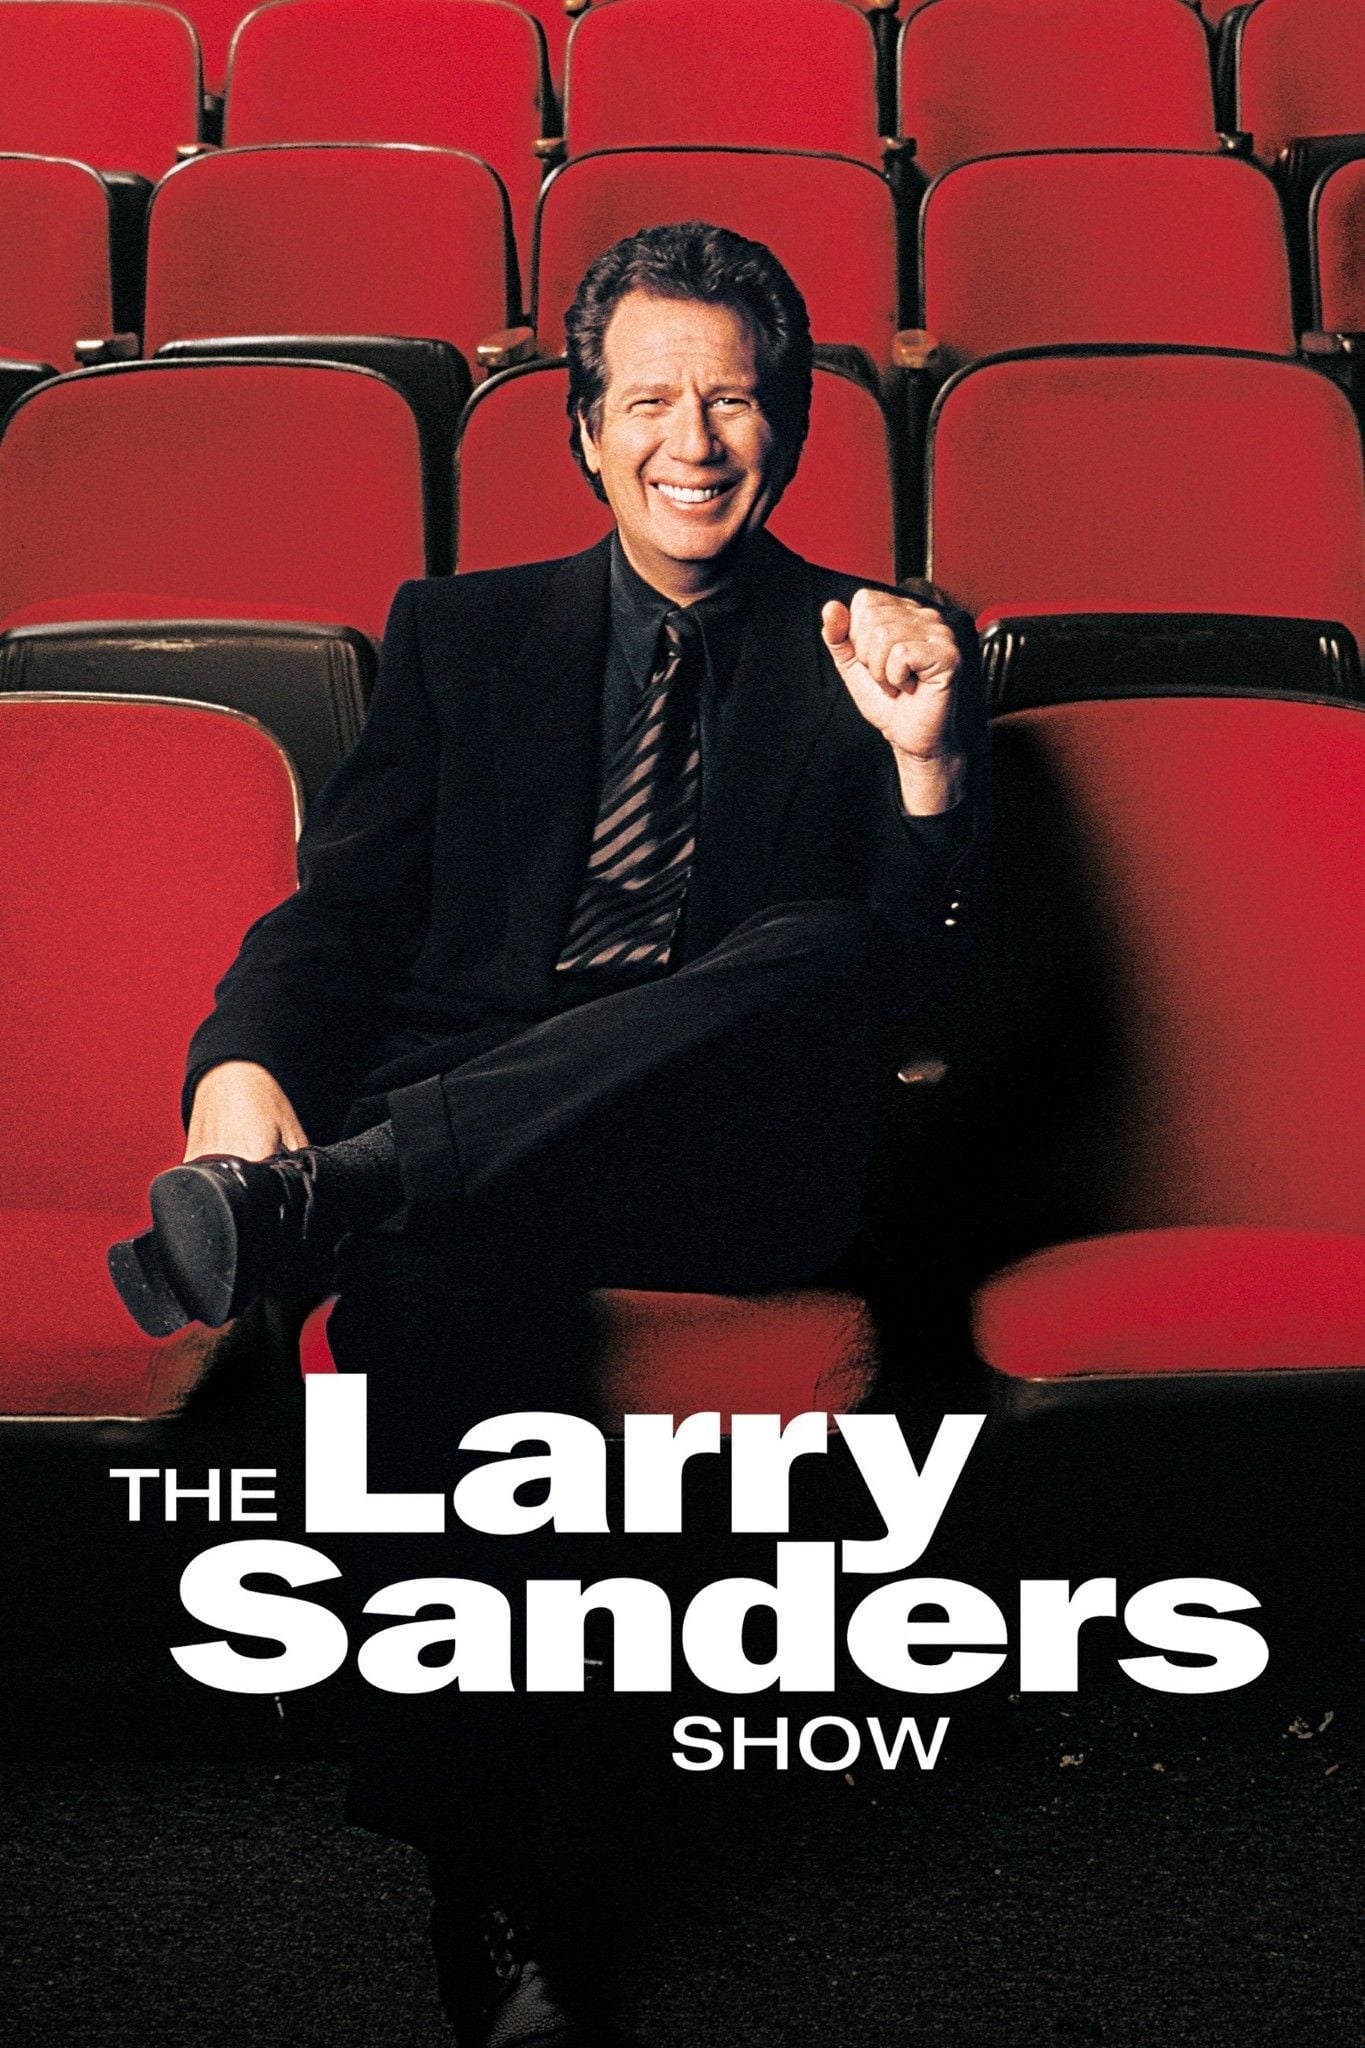 The Making Of 'The Larry Sanders Show' (2007)